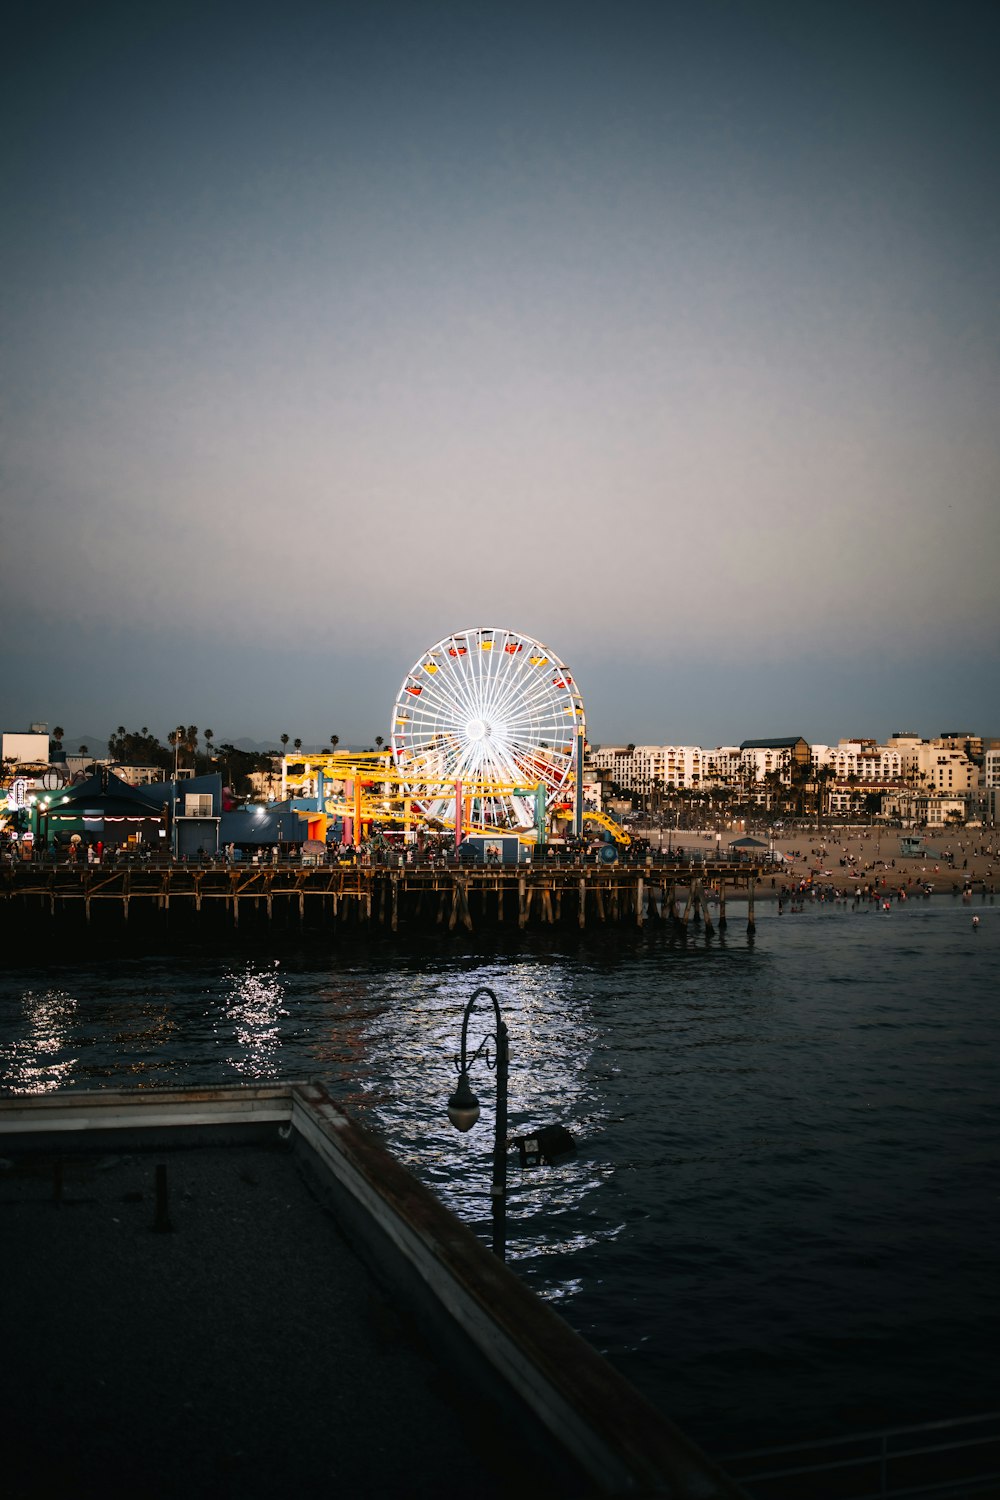 a ferris wheel sitting on top of a pier next to a body of water